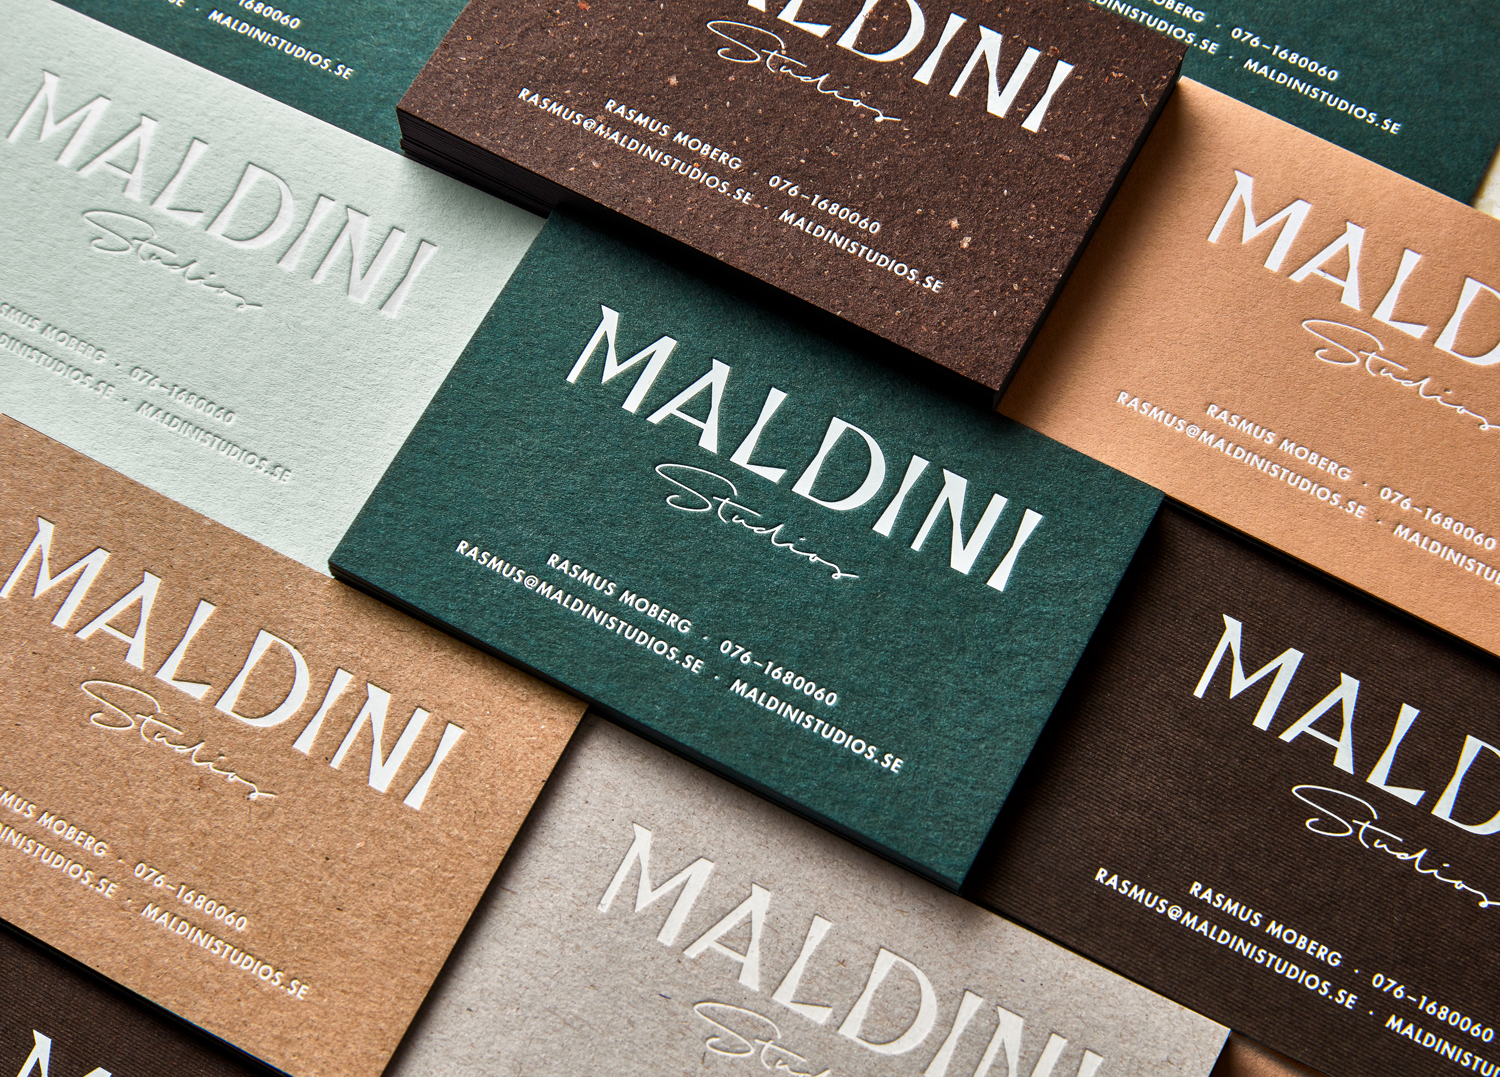 Logotype and letterpress business cards by Jens Nilsson for interior design and carpentry business Maldini Studios